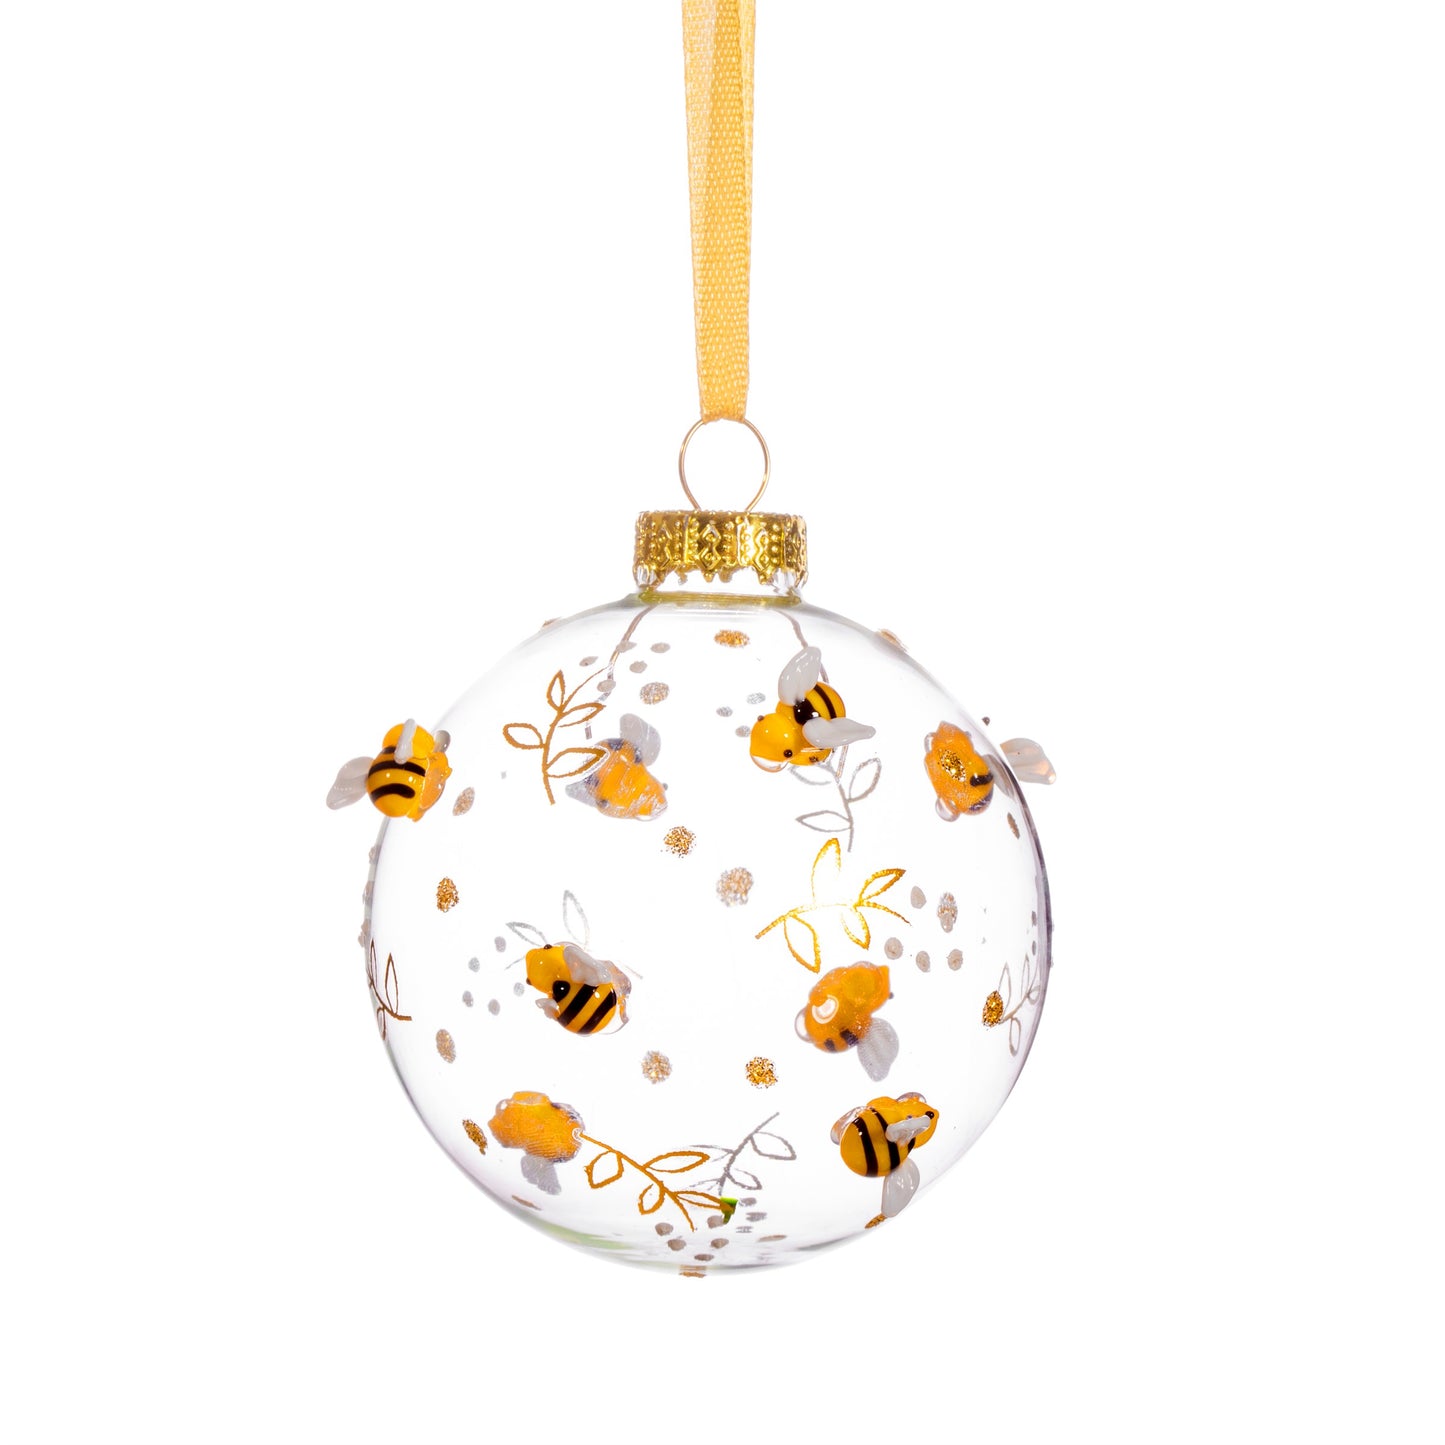 3D Bees and Flowers Design Glass Christmas Tree Bauble